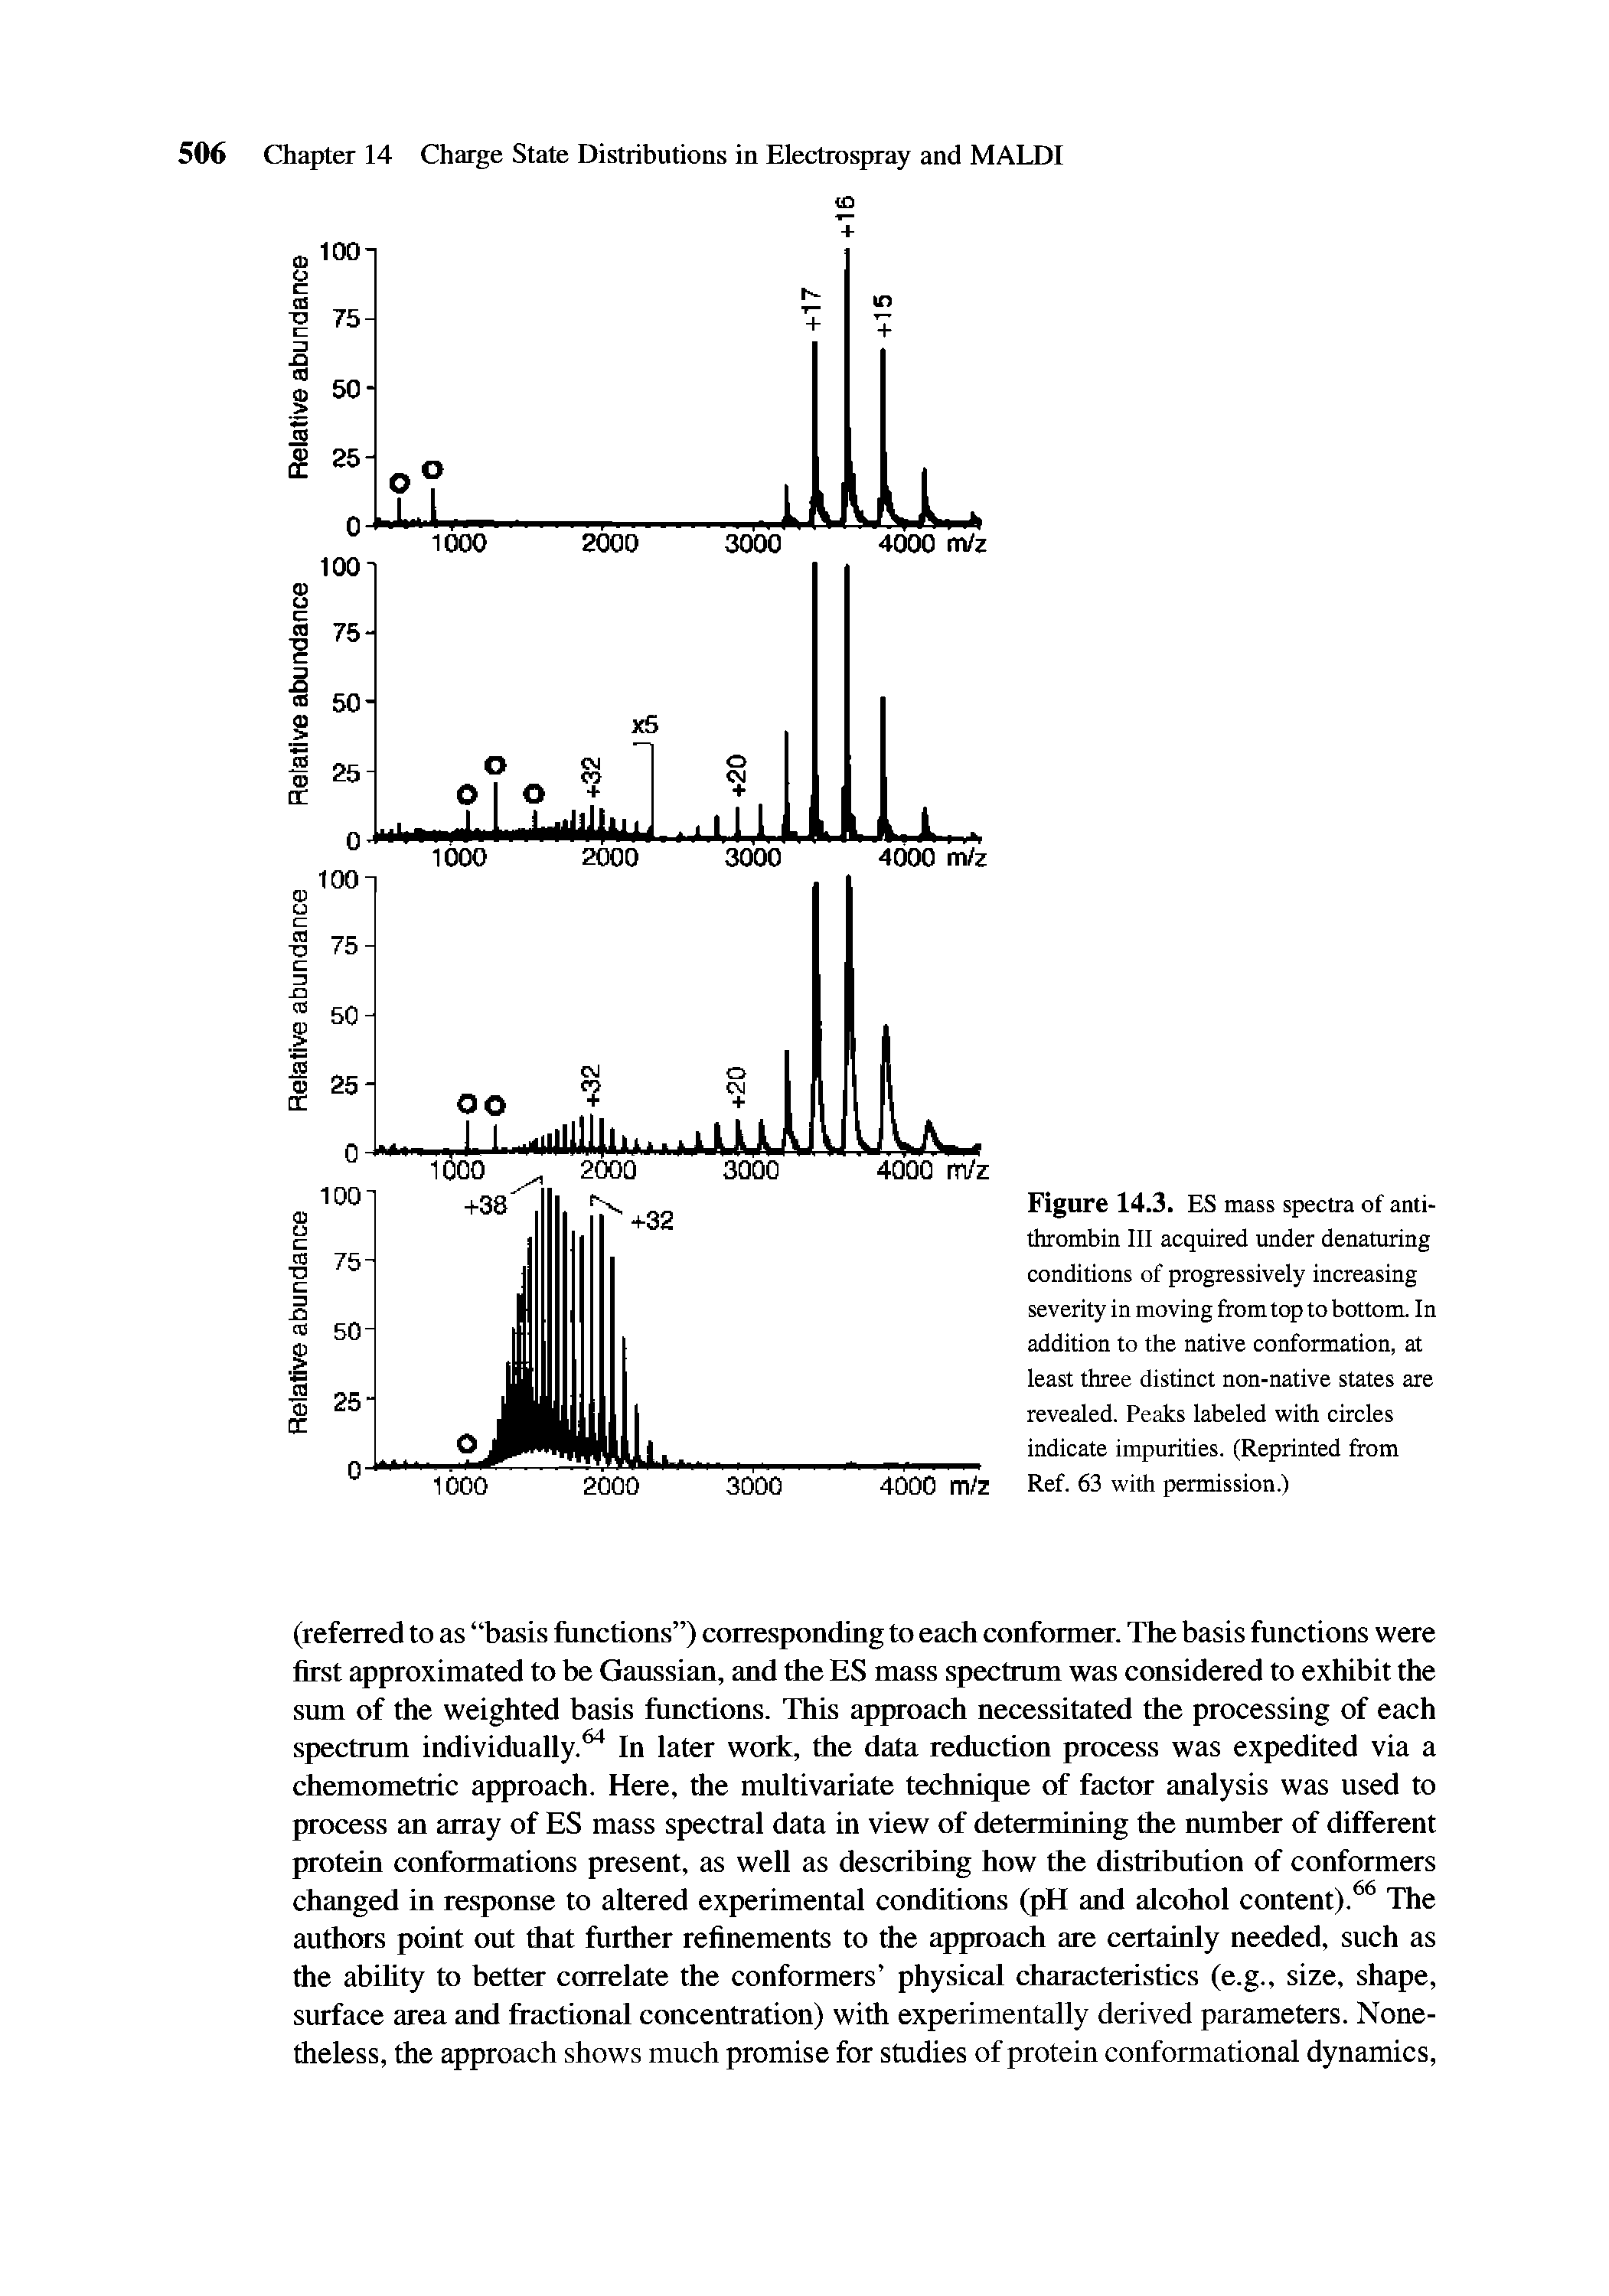 Figure 14.3. ES mass spectra of anti-thrombin III acquired under denaturing conditions of progressively increasing severity in moving from top to bottom In addition to the native conformation, at least three distinct non-native states are revealed. Peaks labeled with circles indicate impurities. (Reprinted from Ref. 63 with permission.)...